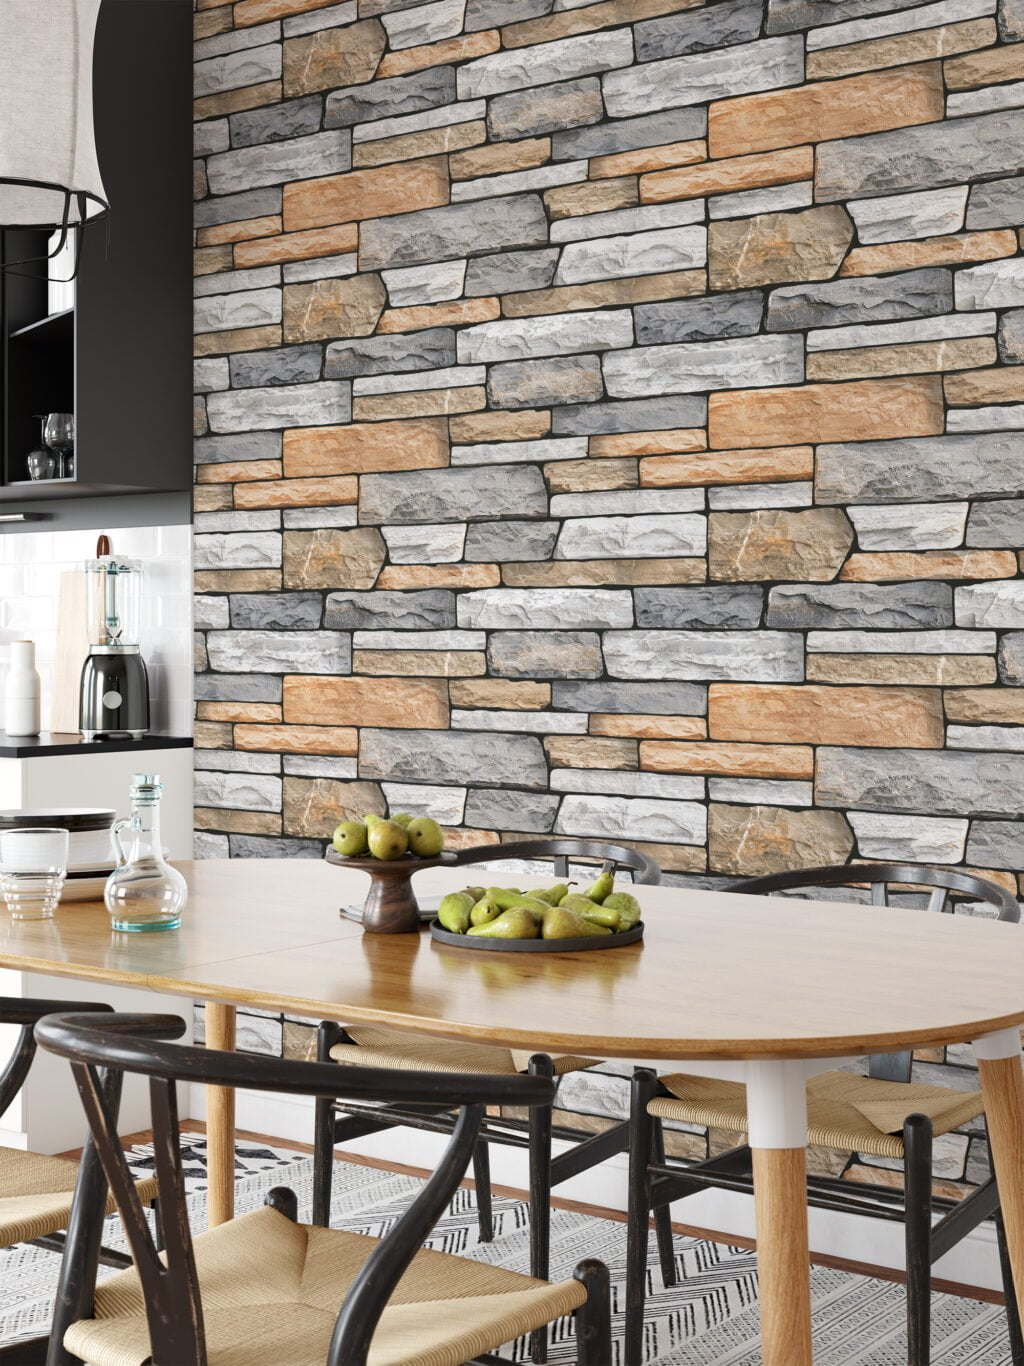 Large Brick Stone Wall Wallpaper, Contemporary Layered Stone Faux Peel & Stick Wall Mural